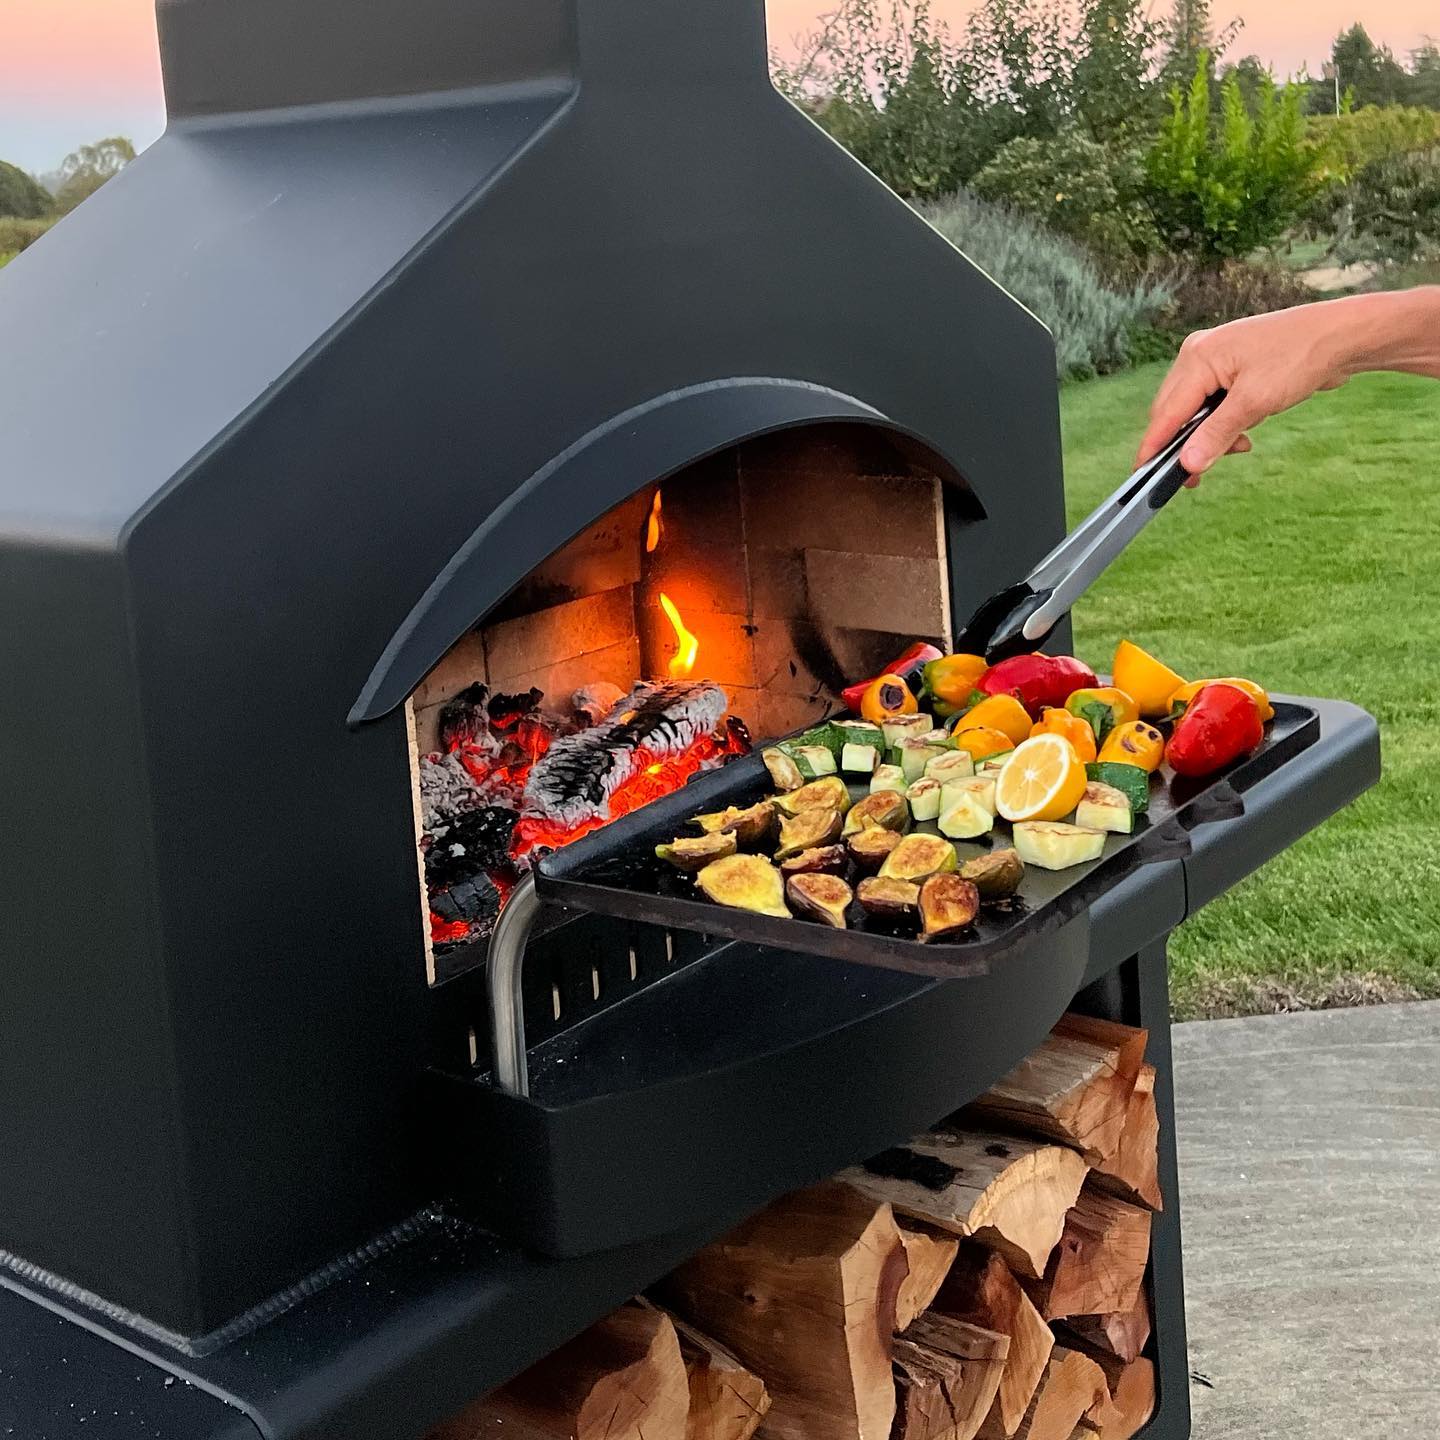 cooking on outdoor fireplace